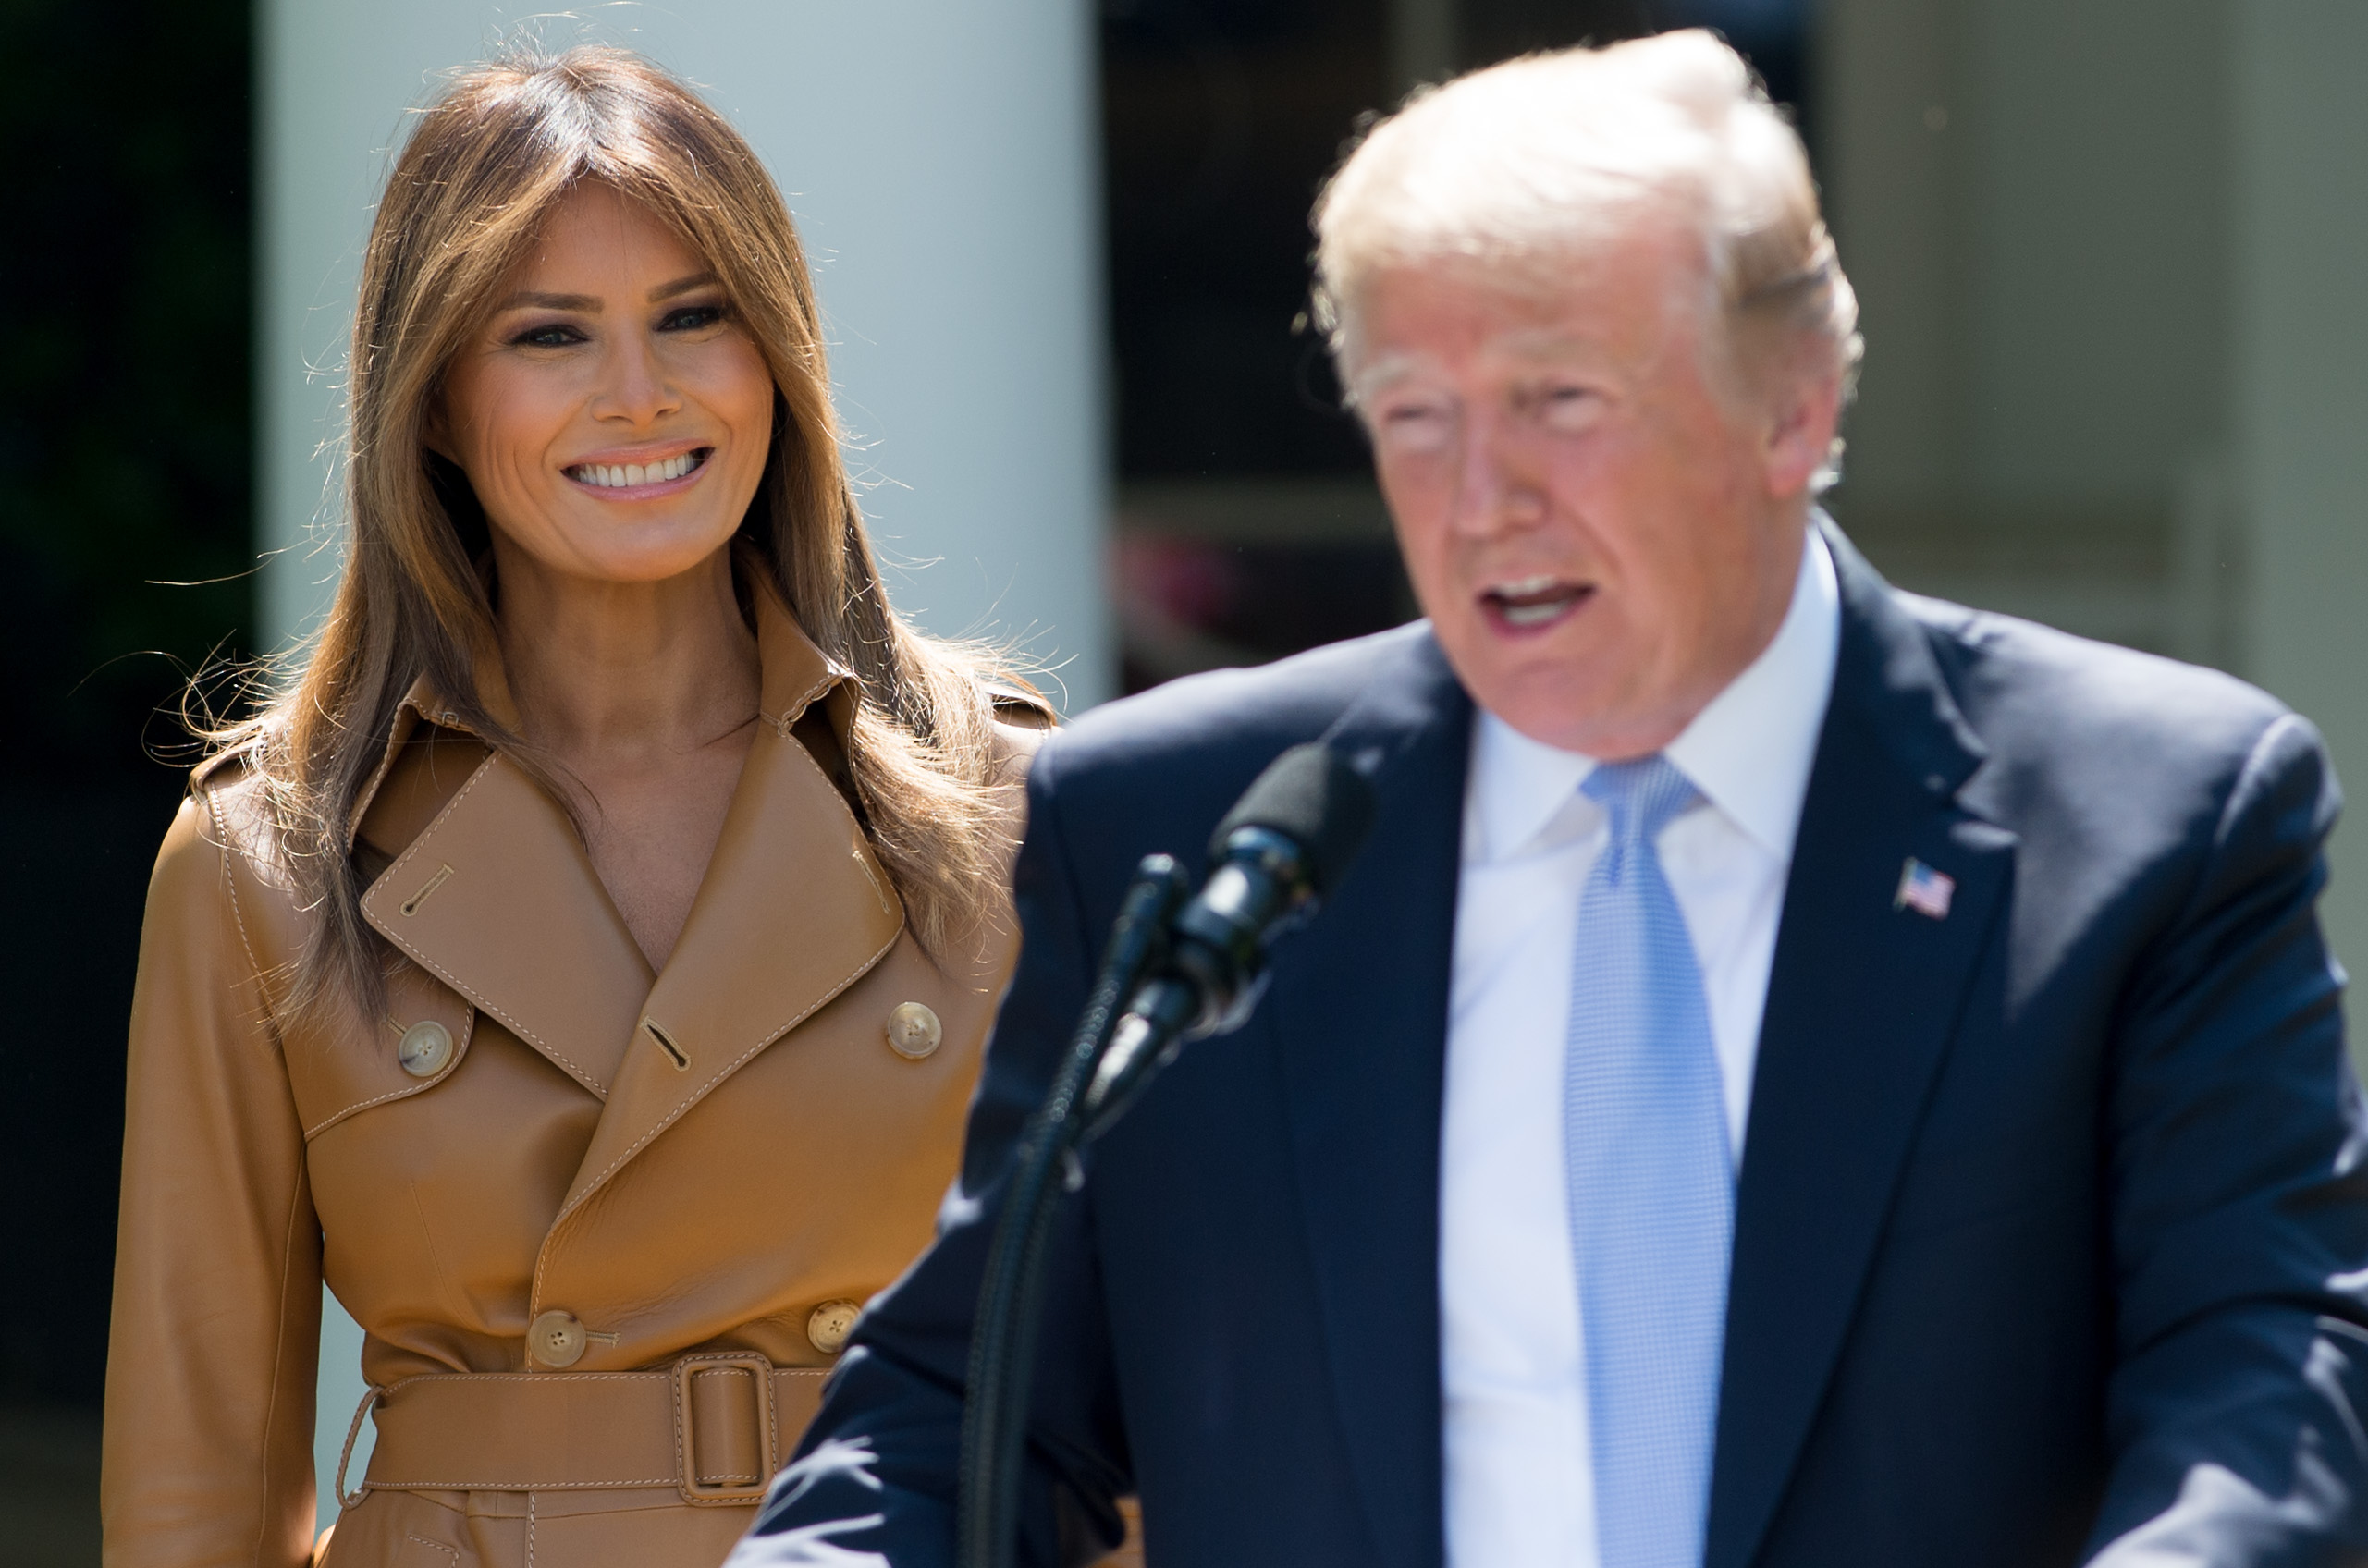 US President Donald Trump speaks alongside First Lady Melania Trump as she announces her "Be Best" children's initiative in the Rose Garden of the White House in Washington, DC, May 7, 2018. (Photo by SAUL LOEB / AFP) (Photo credit should read SAUL LOEB/AFP/Getty Images)